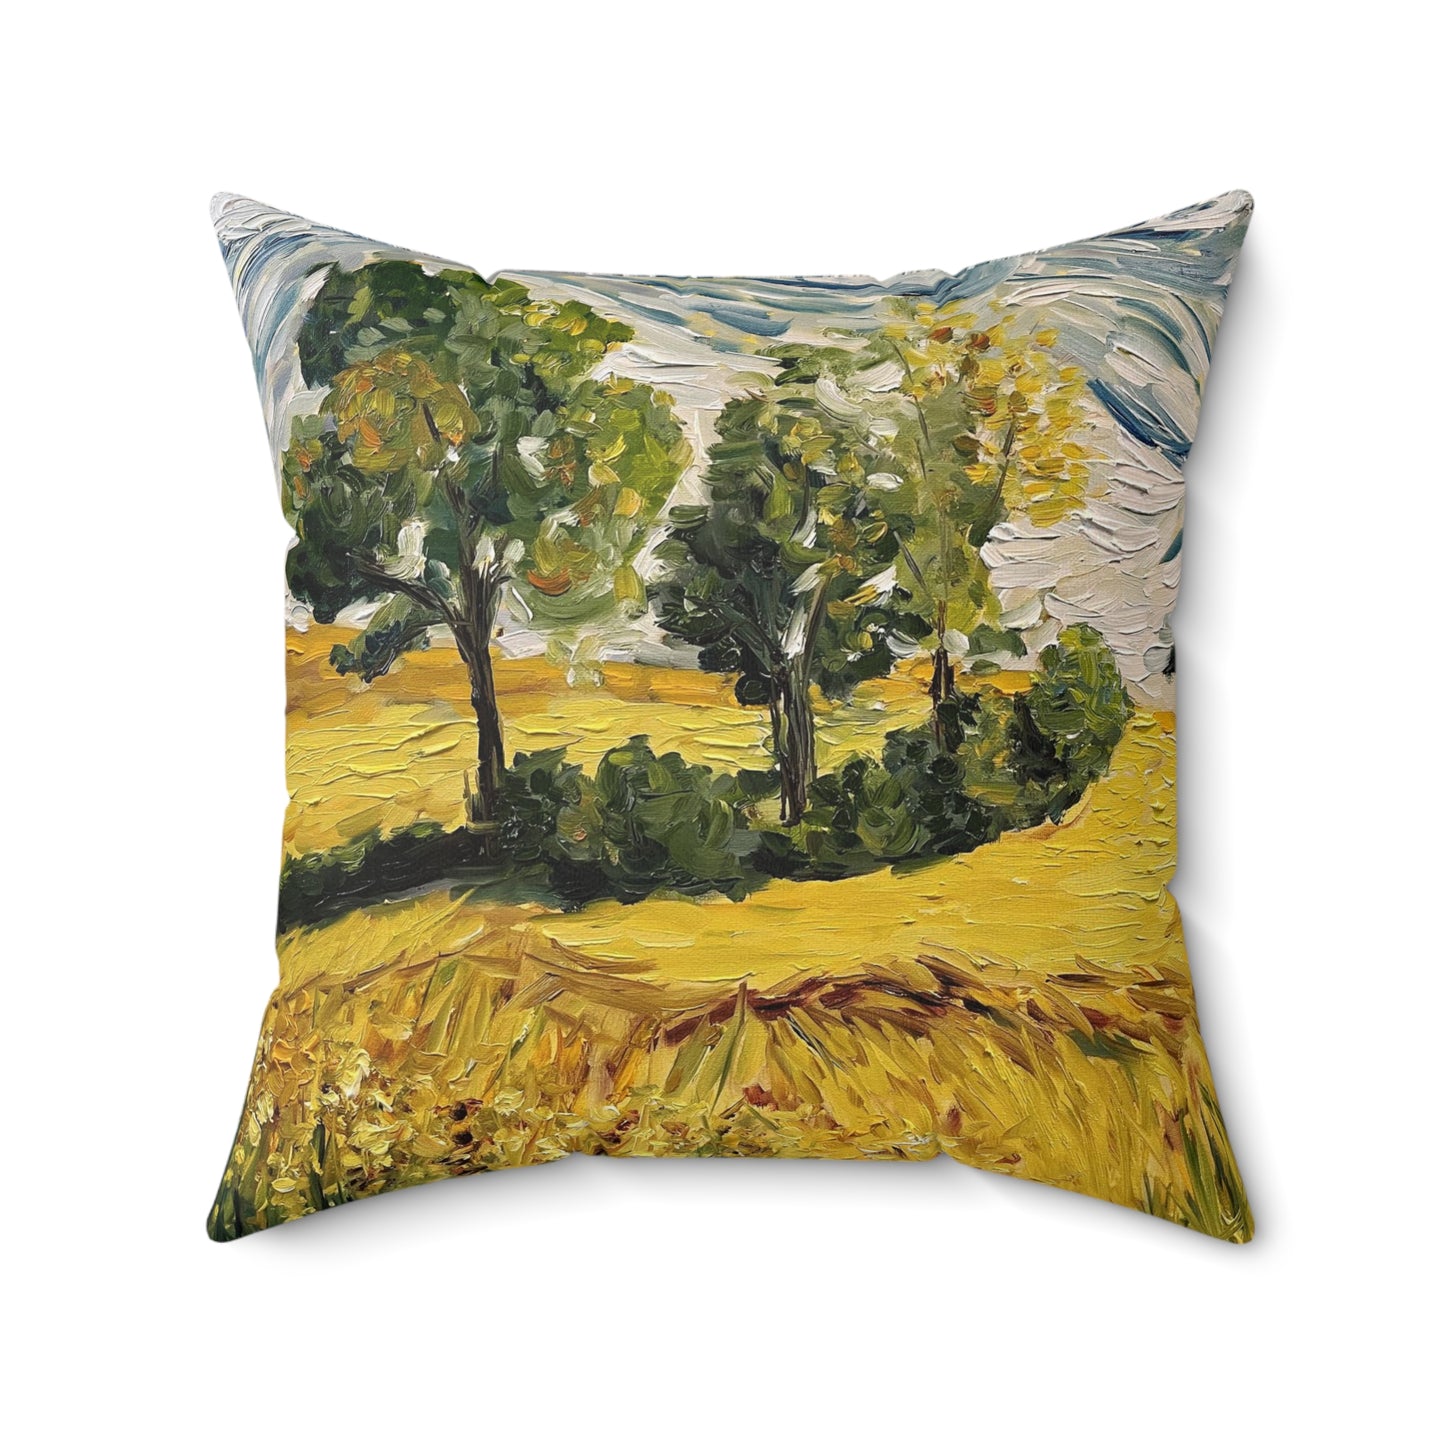 Sunny Day 2 Indoor Spun Polyester Square Pillow